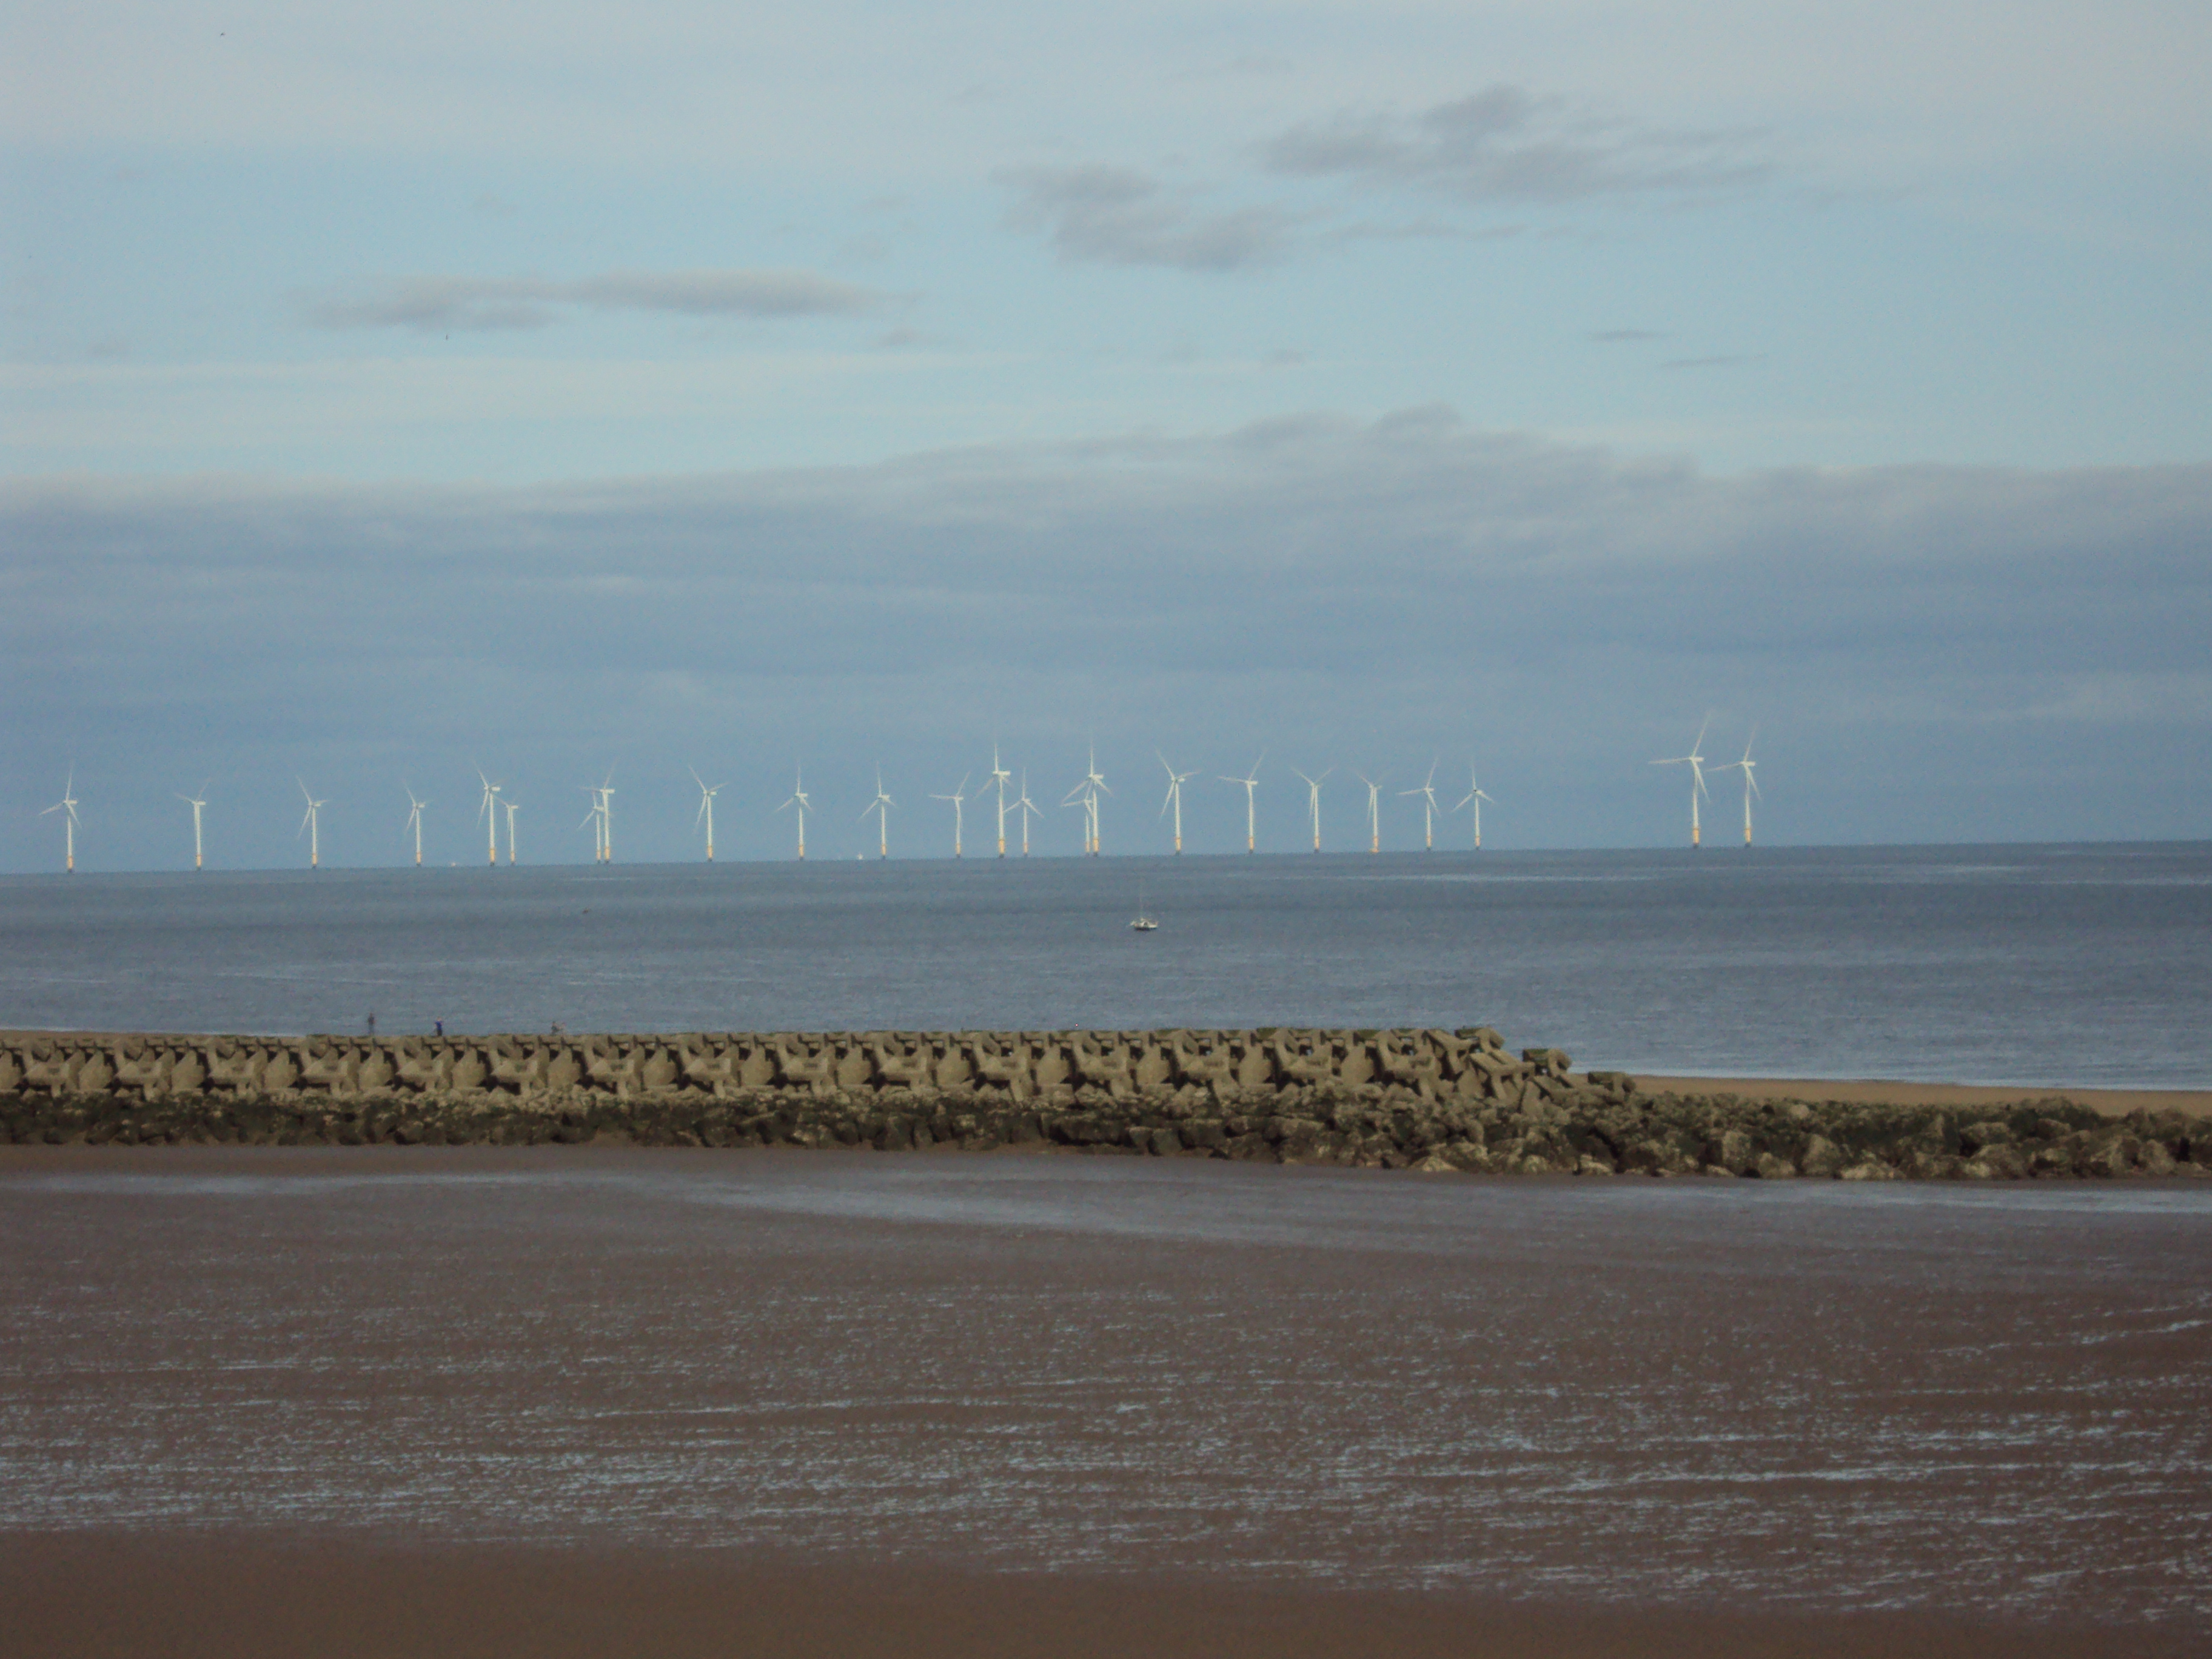 Construction of the Rampion Offshore Wind Farm is now well underway.